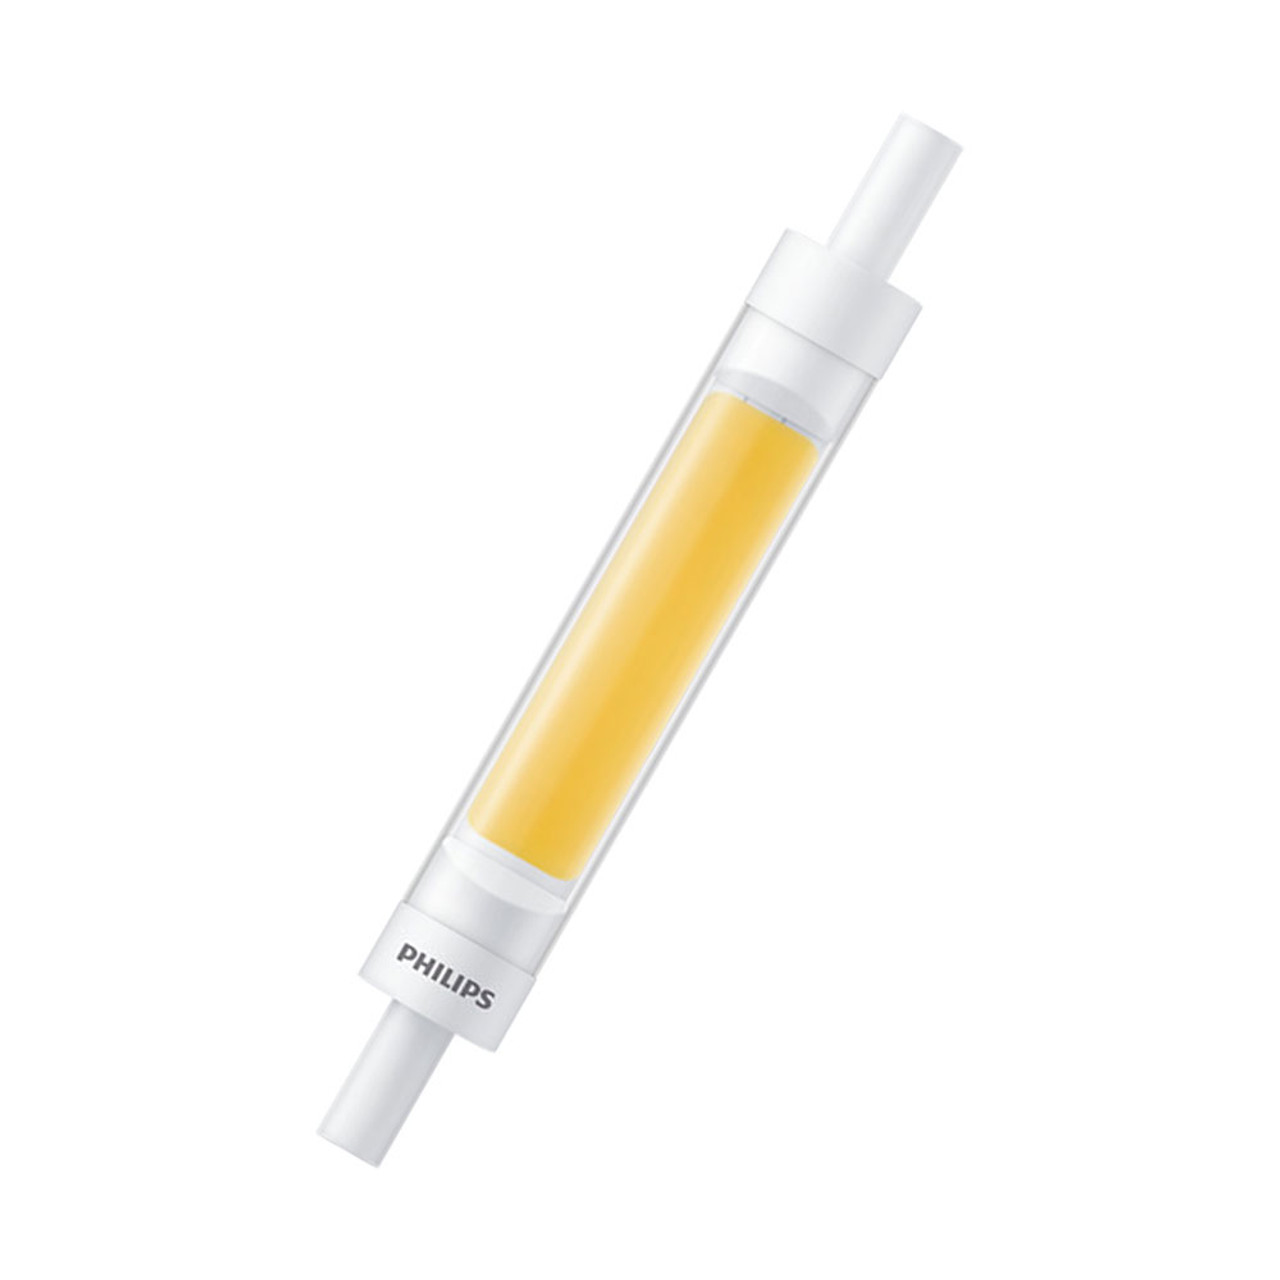 Philips LED Core Pro R7s 118mm 7.2W (60W) 4000K 850lm Glass